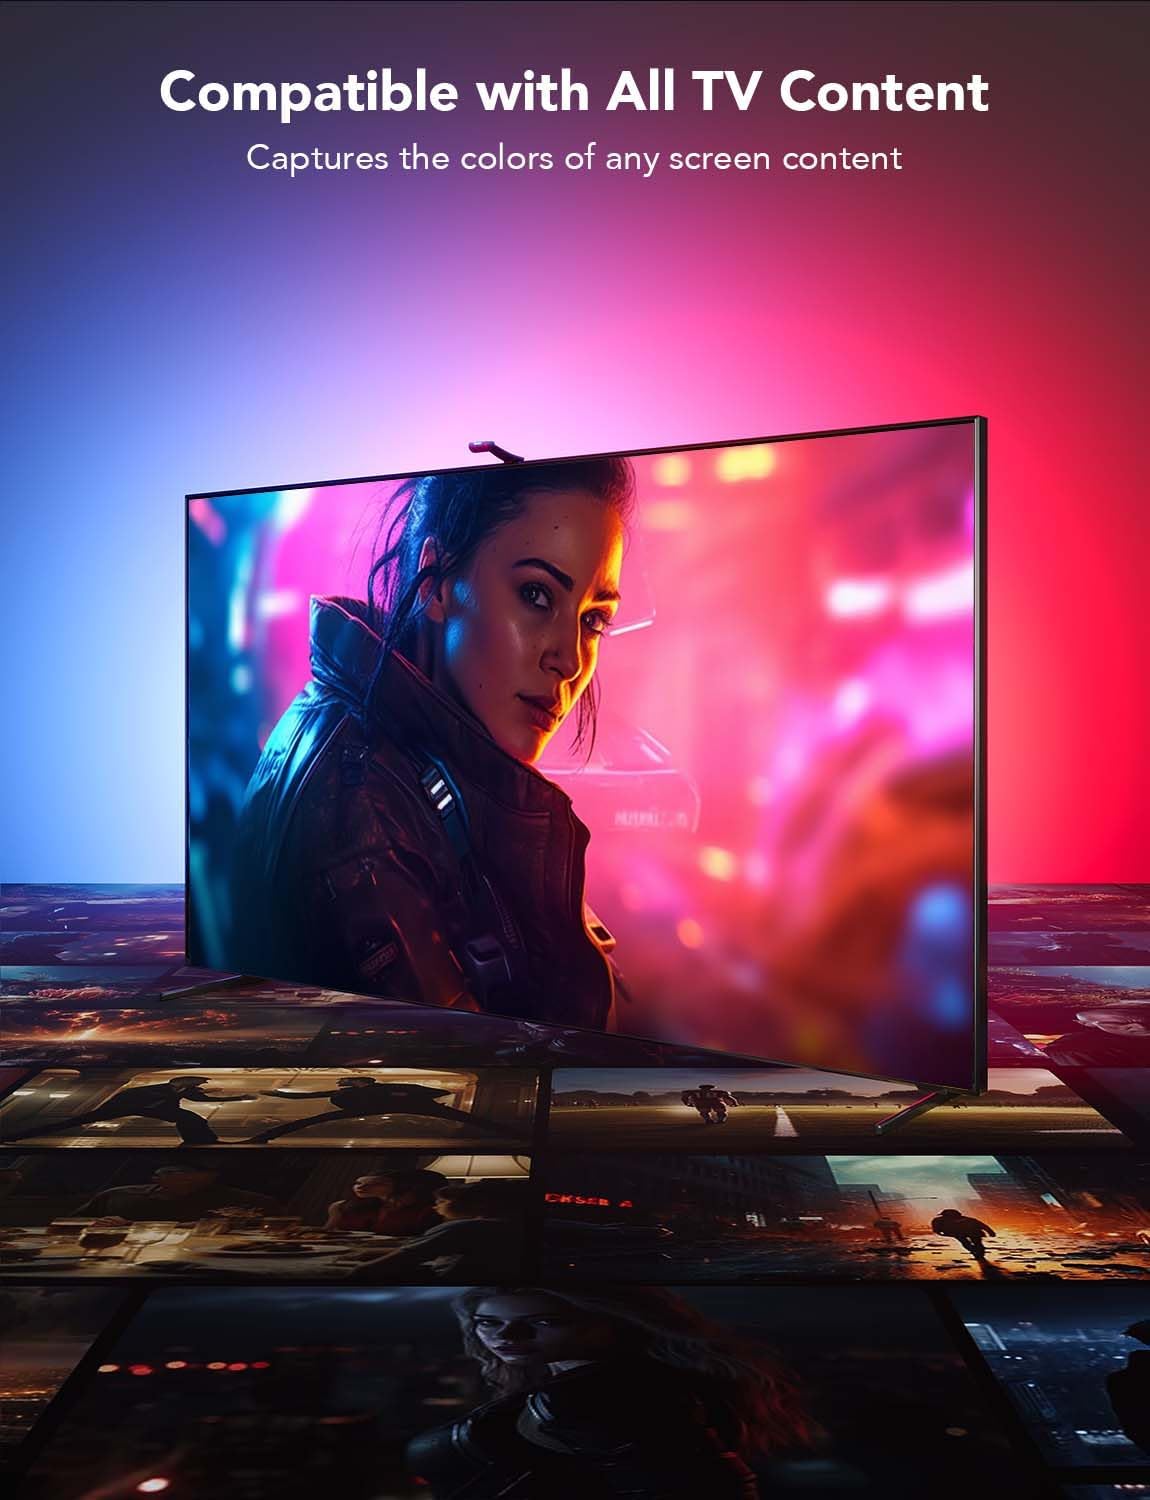 Govee Envisual TV Backlight T2 with Dual Cameras, 16.4ft RGBIC Wi-Fi LED for 75-85 inch TVs, Works Alexa and Google Assistant, Smart App Control, Music Sync Lights, Adapter, (H605C)